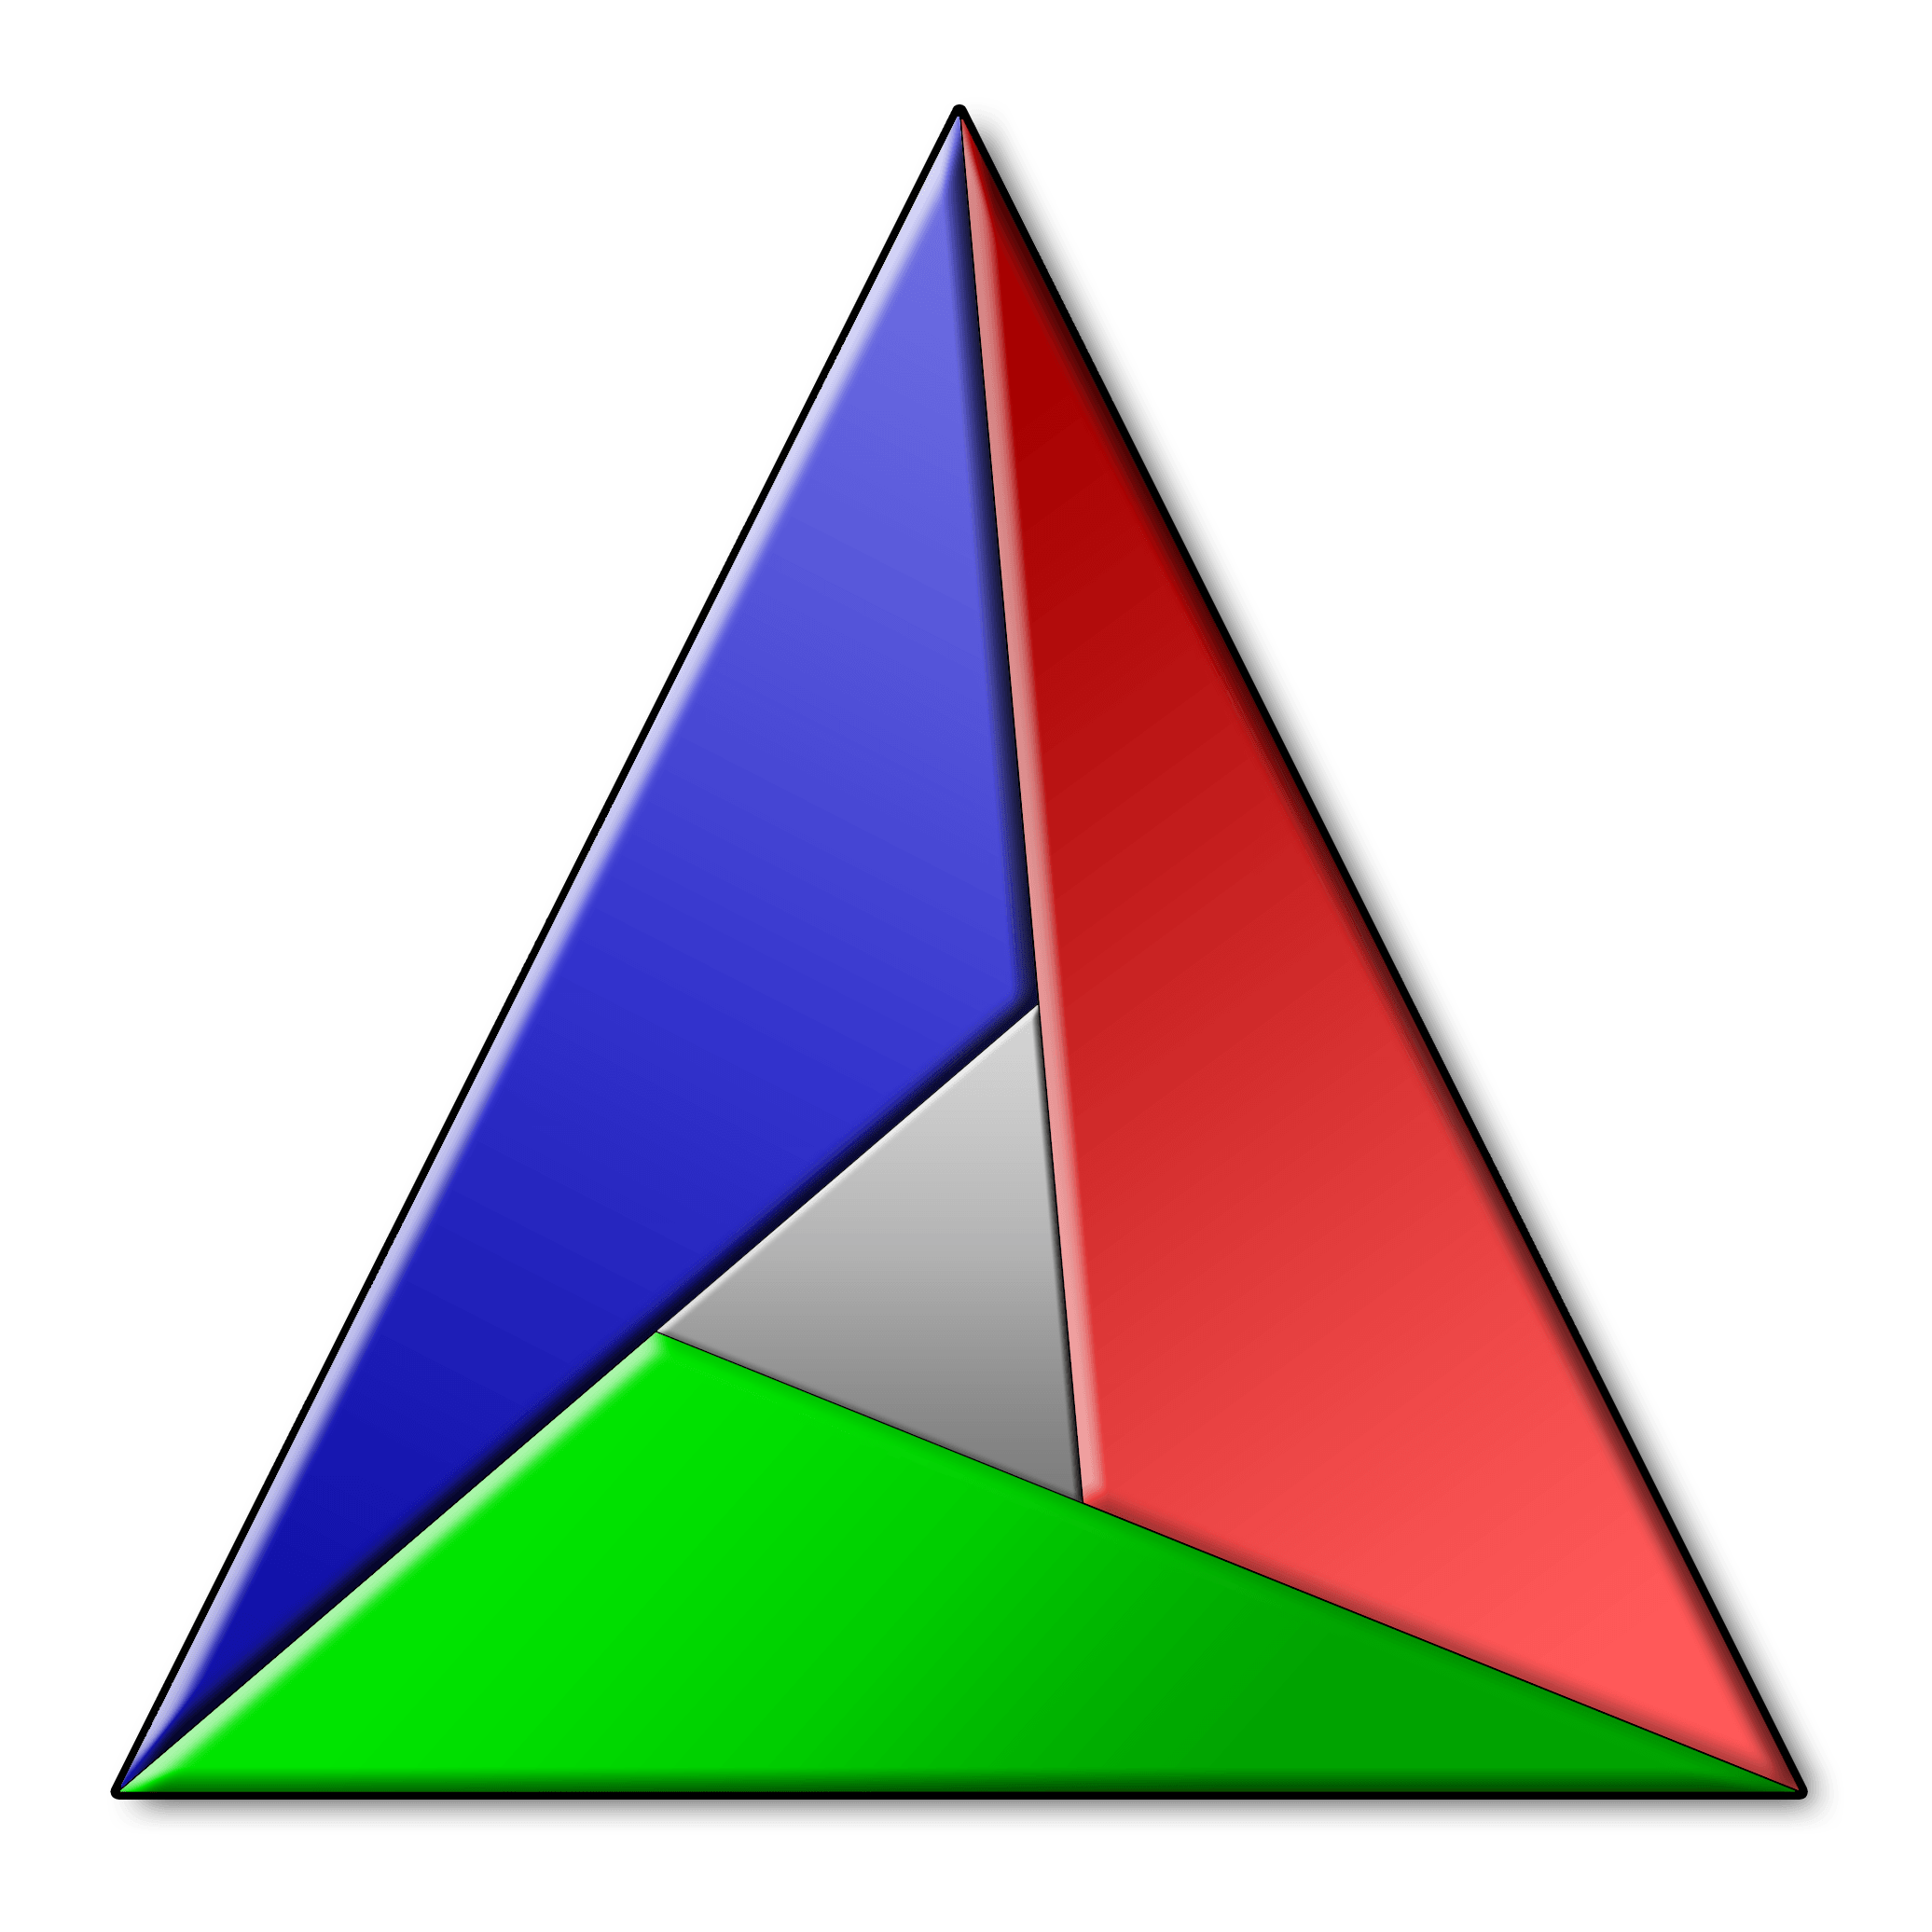 Google Triangle Logo - File:CMake-logo-triangle-high-res.png - Wikimedia Commons